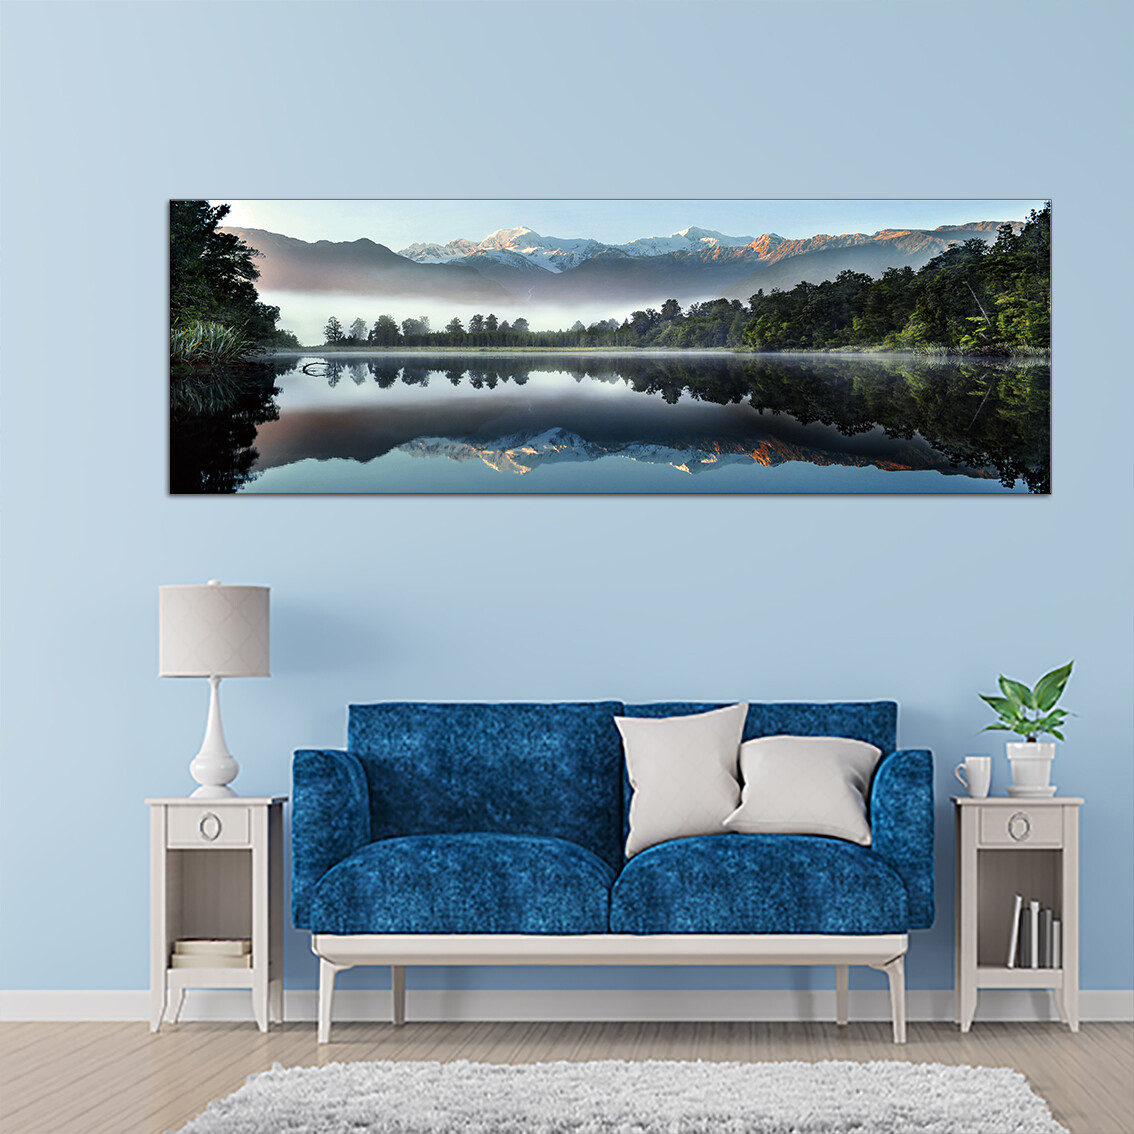 Mirror Lake - Modern Luxury Wall art Printed on Acrylic Glass - Frameless and Ready to Hang